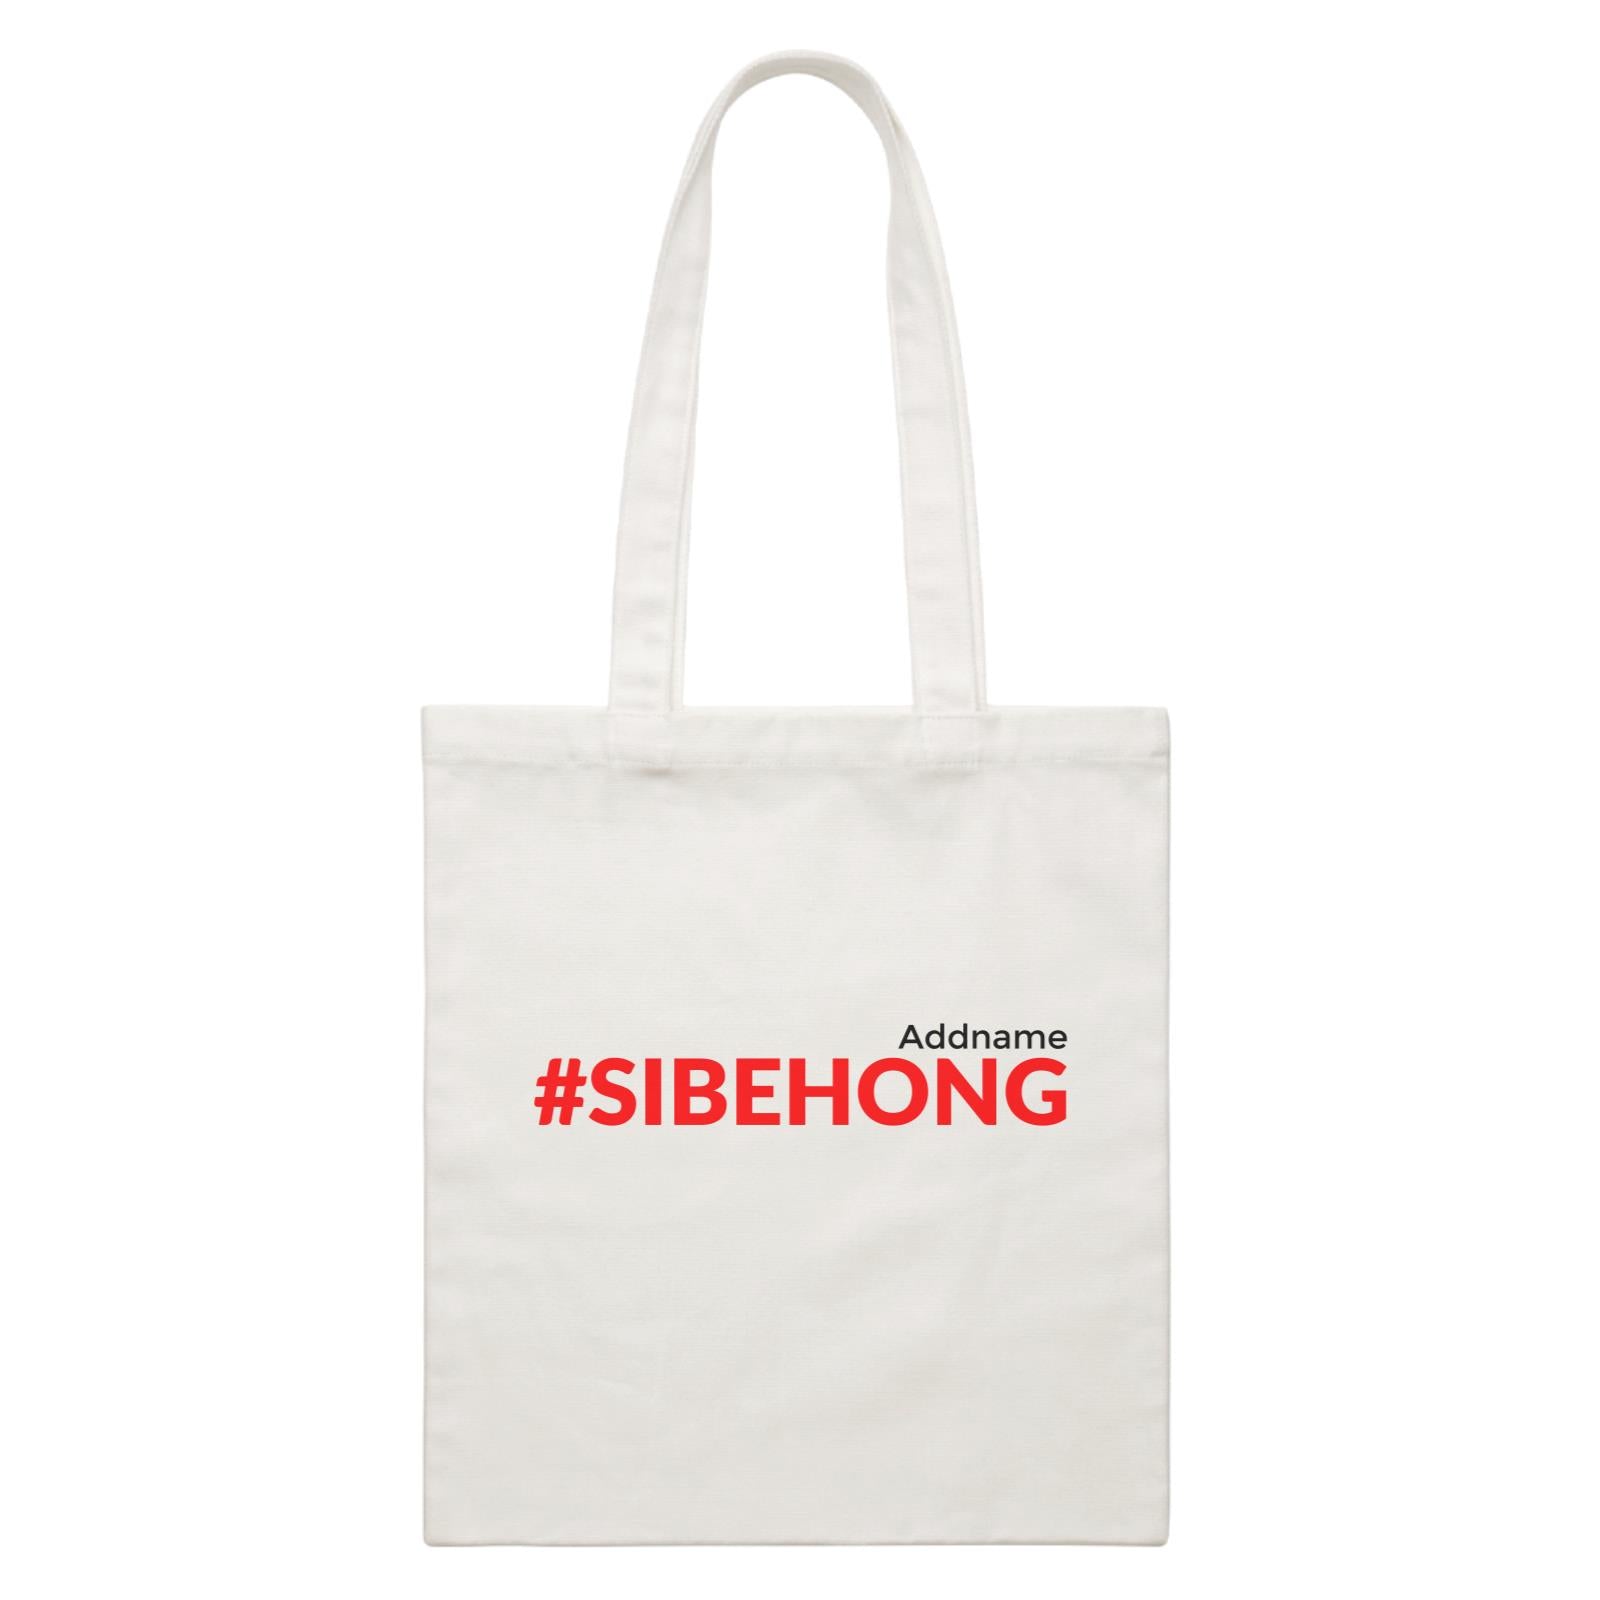 Chinese New Year Hashtag Sibeh Ong Accessories Canvas Bag